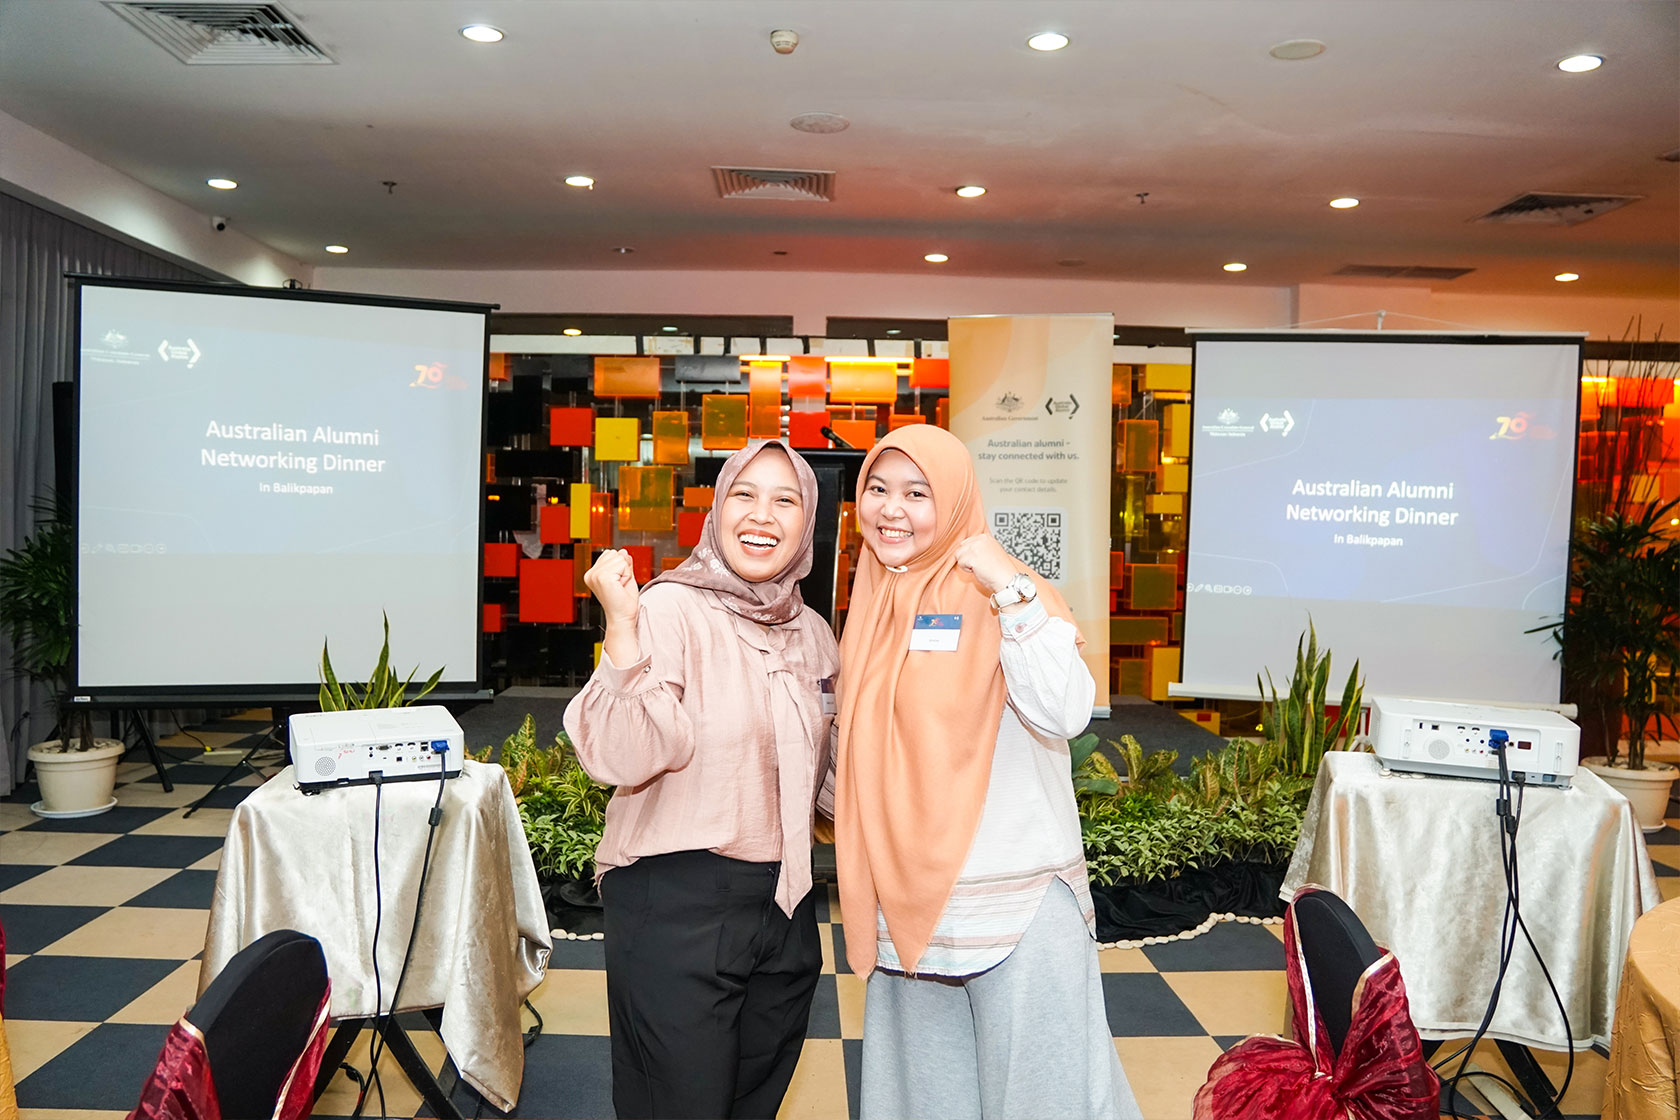 Alumni takes the opportunity to reconnect with fellow OzAlum in this networking dinner.